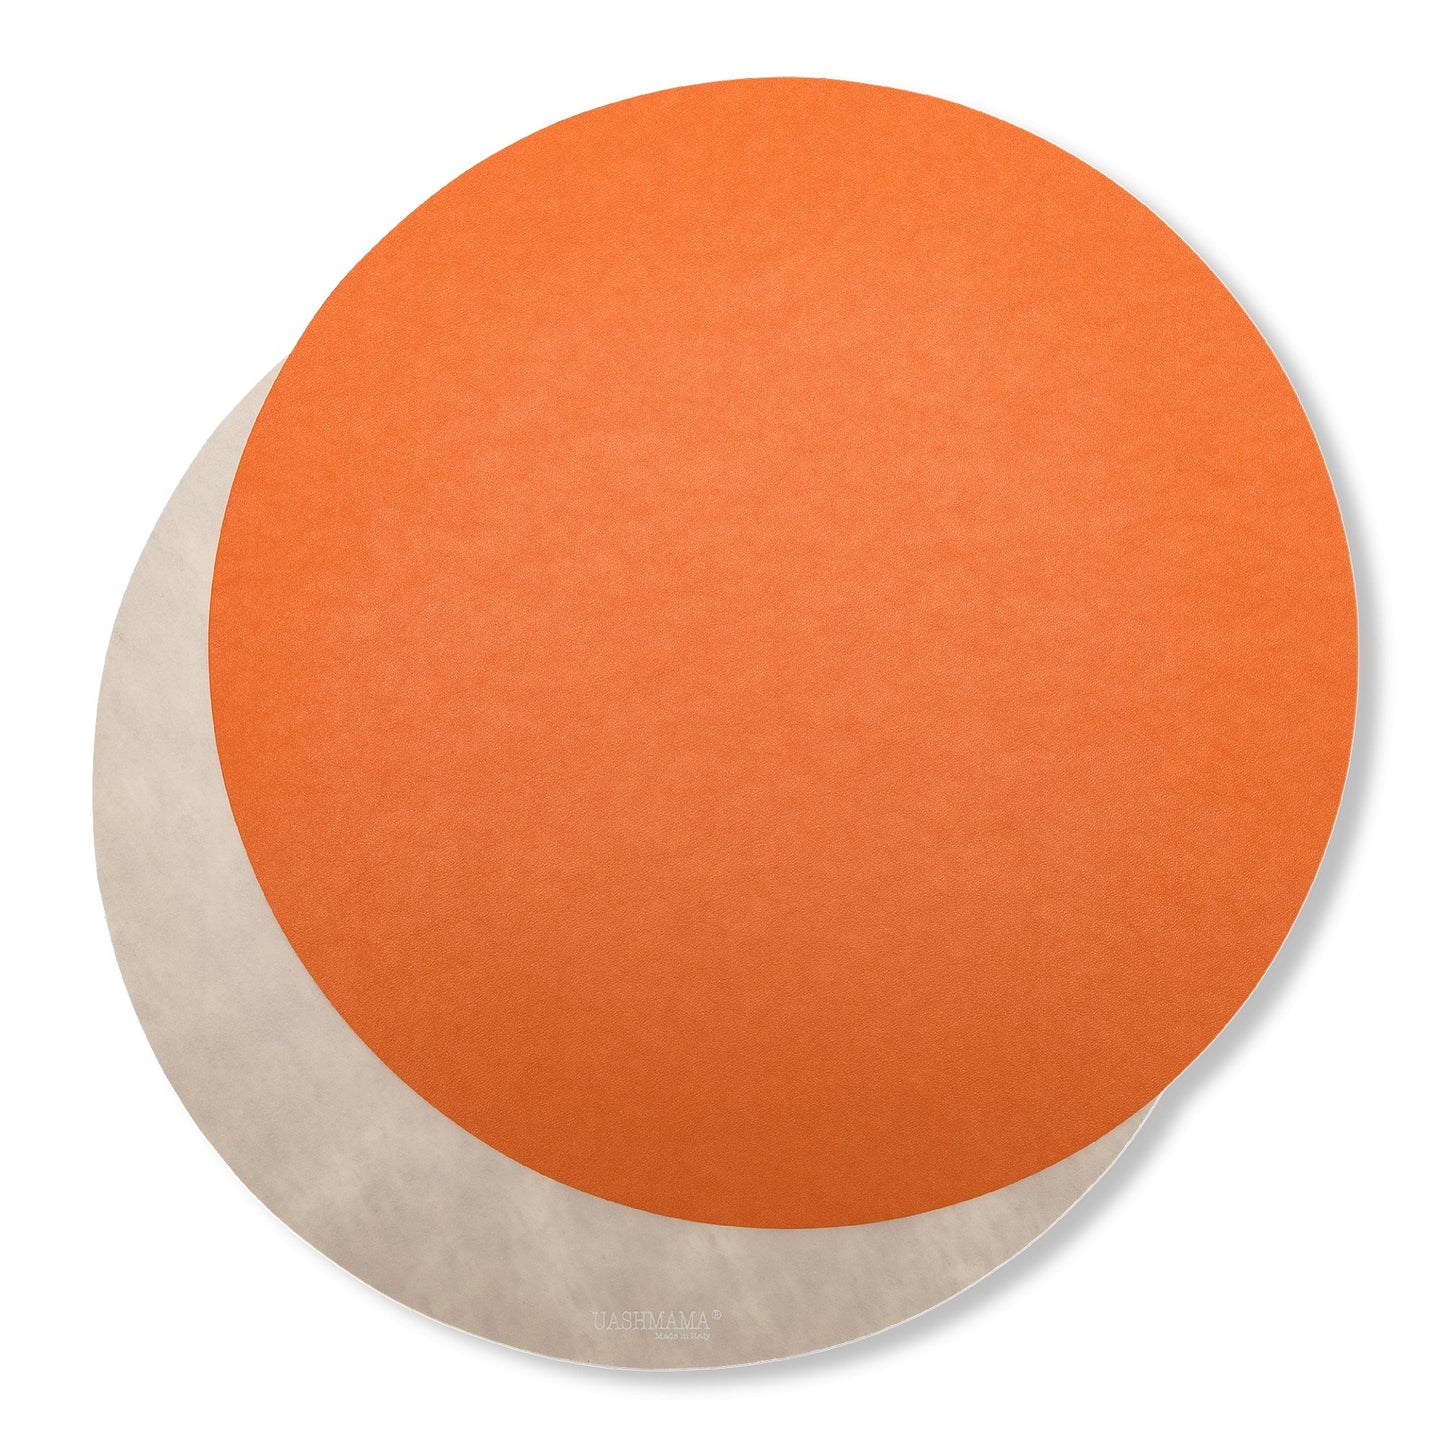 Two round washable paper placemats are shown one on top of the other. The one in the foreground is orange and the one at rear is beige.